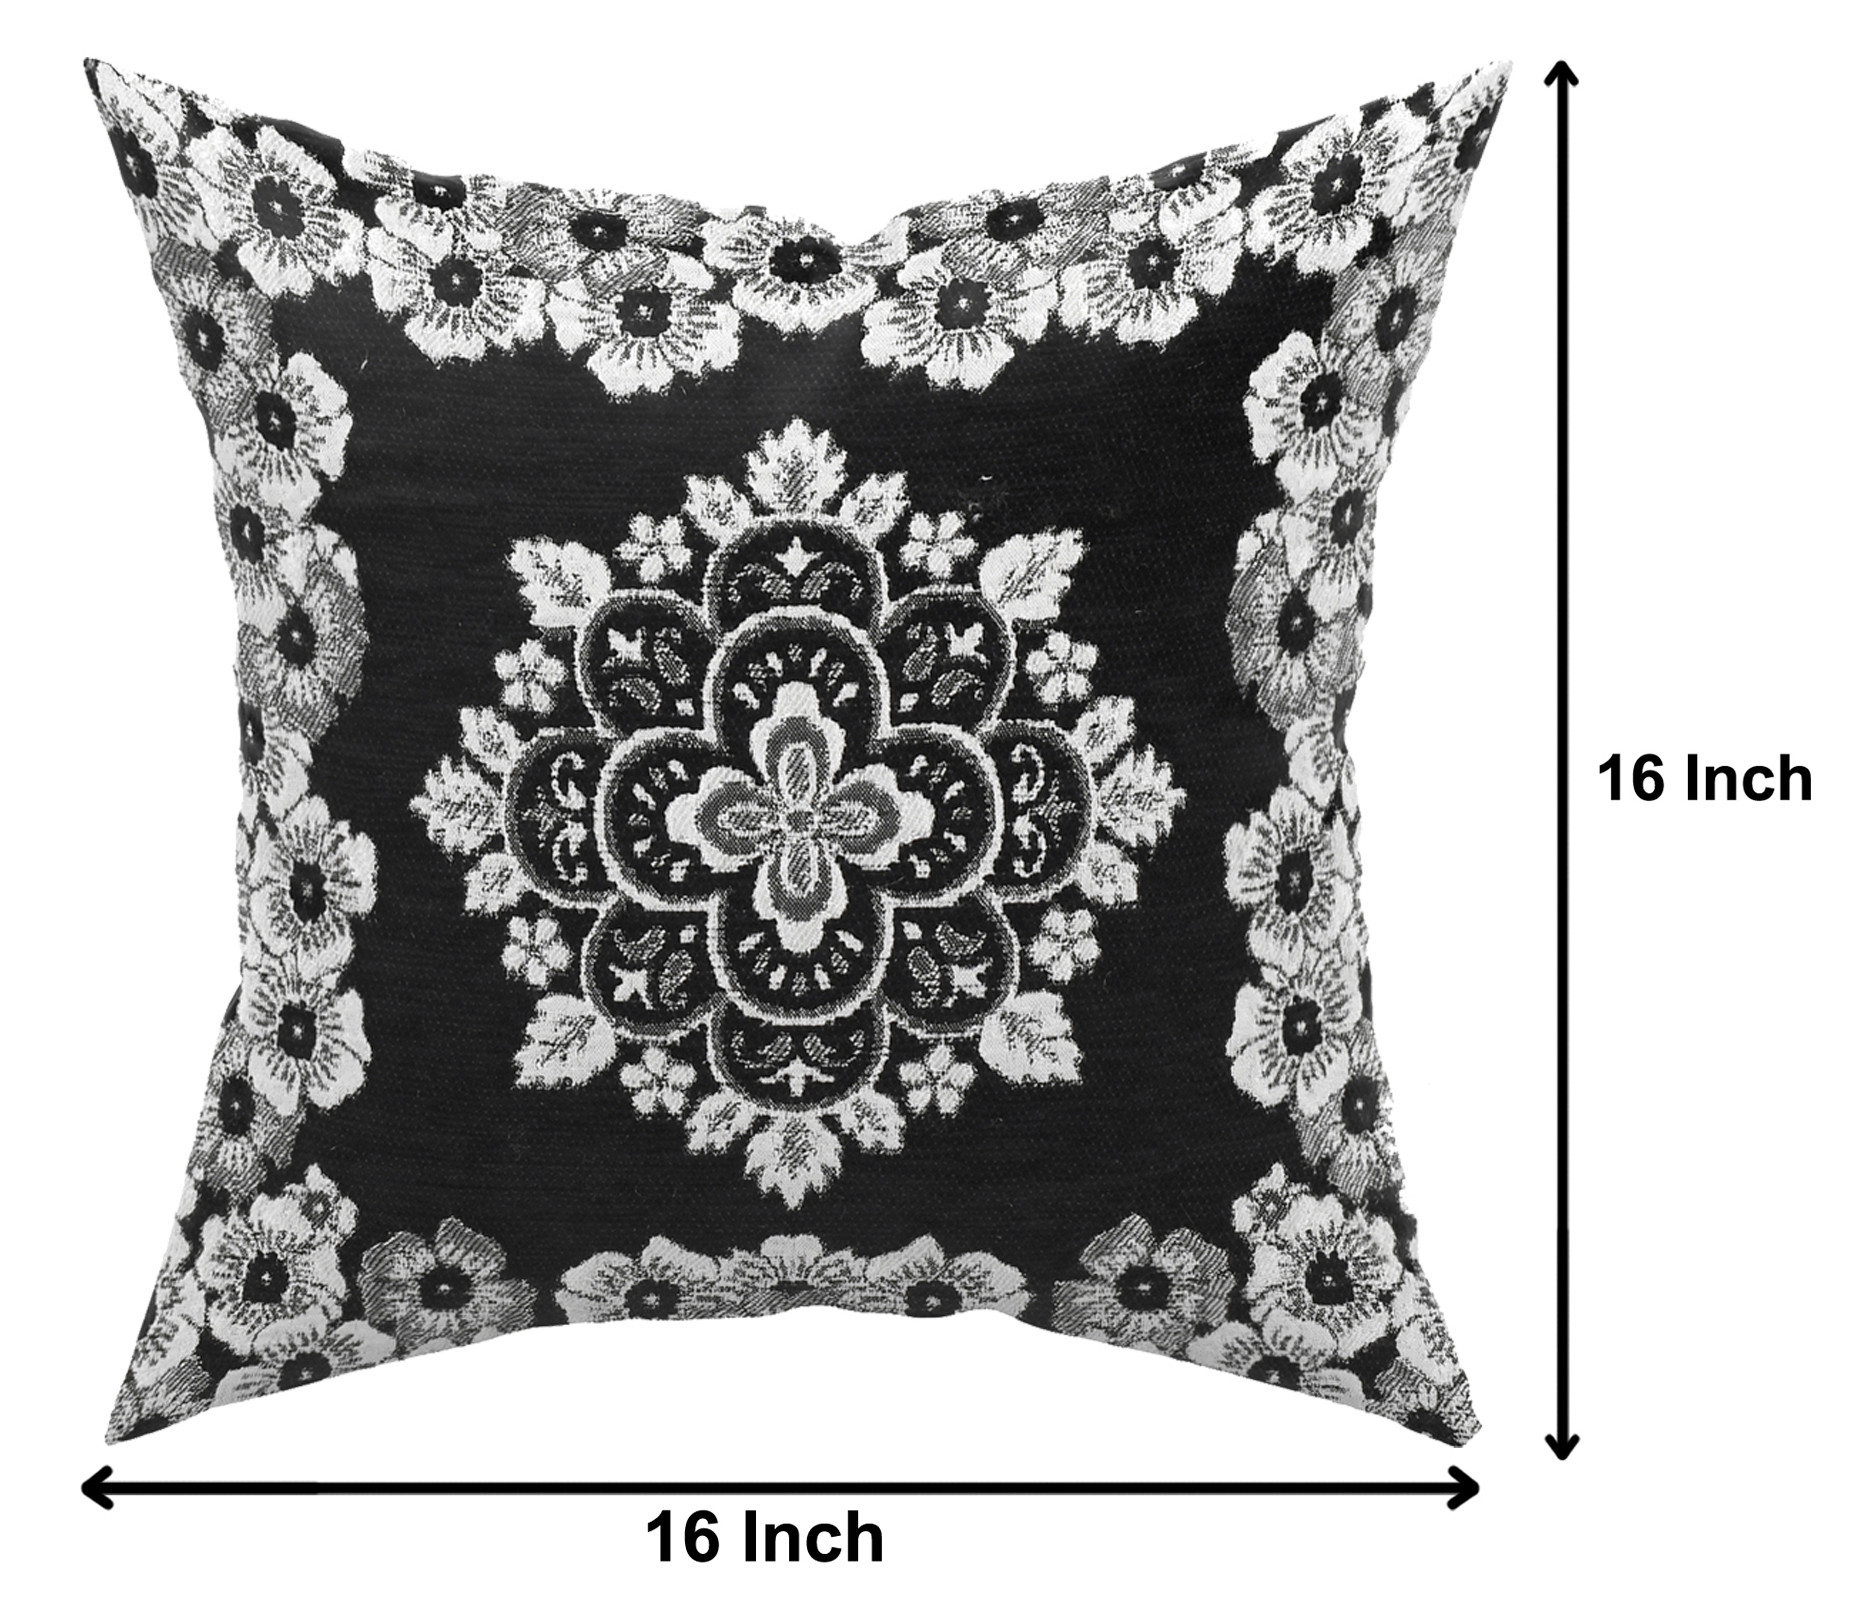 Kuber Industries Velvet Flower Design Soft Decorative Square Throw Pillow Cover, Cushion Covers, Pillow Case For Sofa Couch Bed Chair 16x16 Inch-(Black)